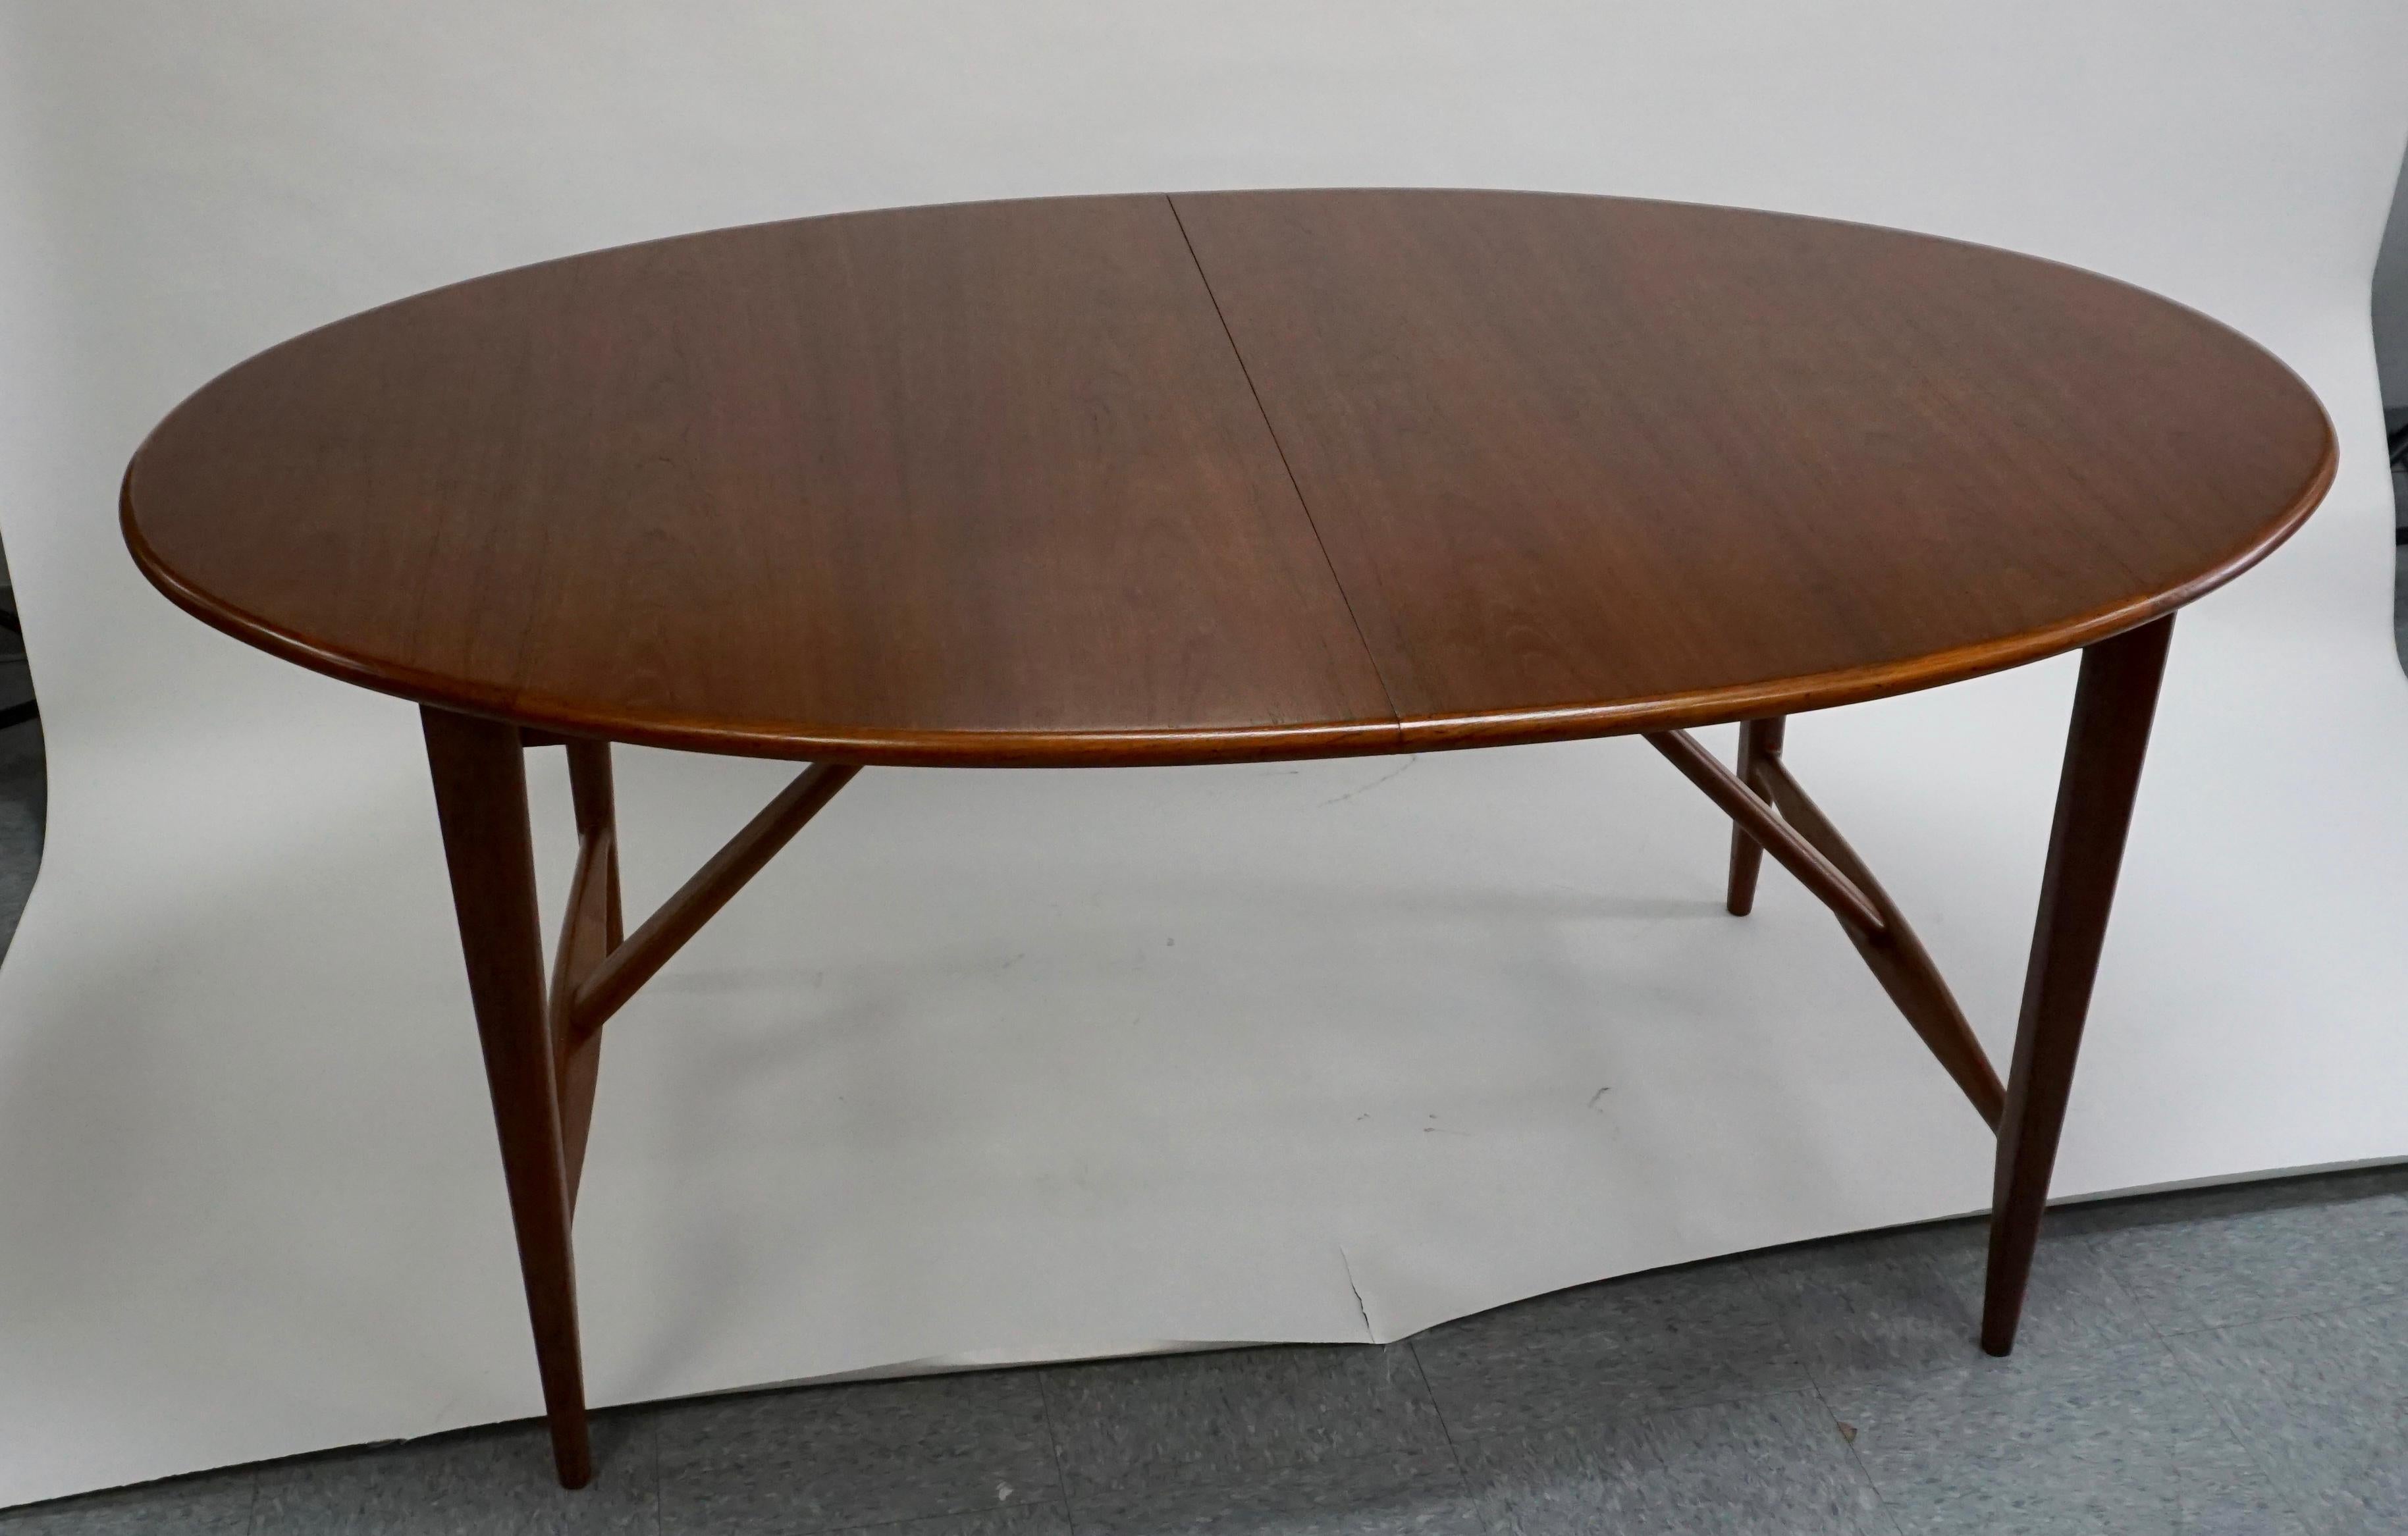 Restored. This long oval table is 120 inches long when all 3 of the 18 inch leaves are in place. Scales down to just 66 inches long without any leaves. Only 42 inches wide at centre, making this a great table for more narrow spaces. Teak is a